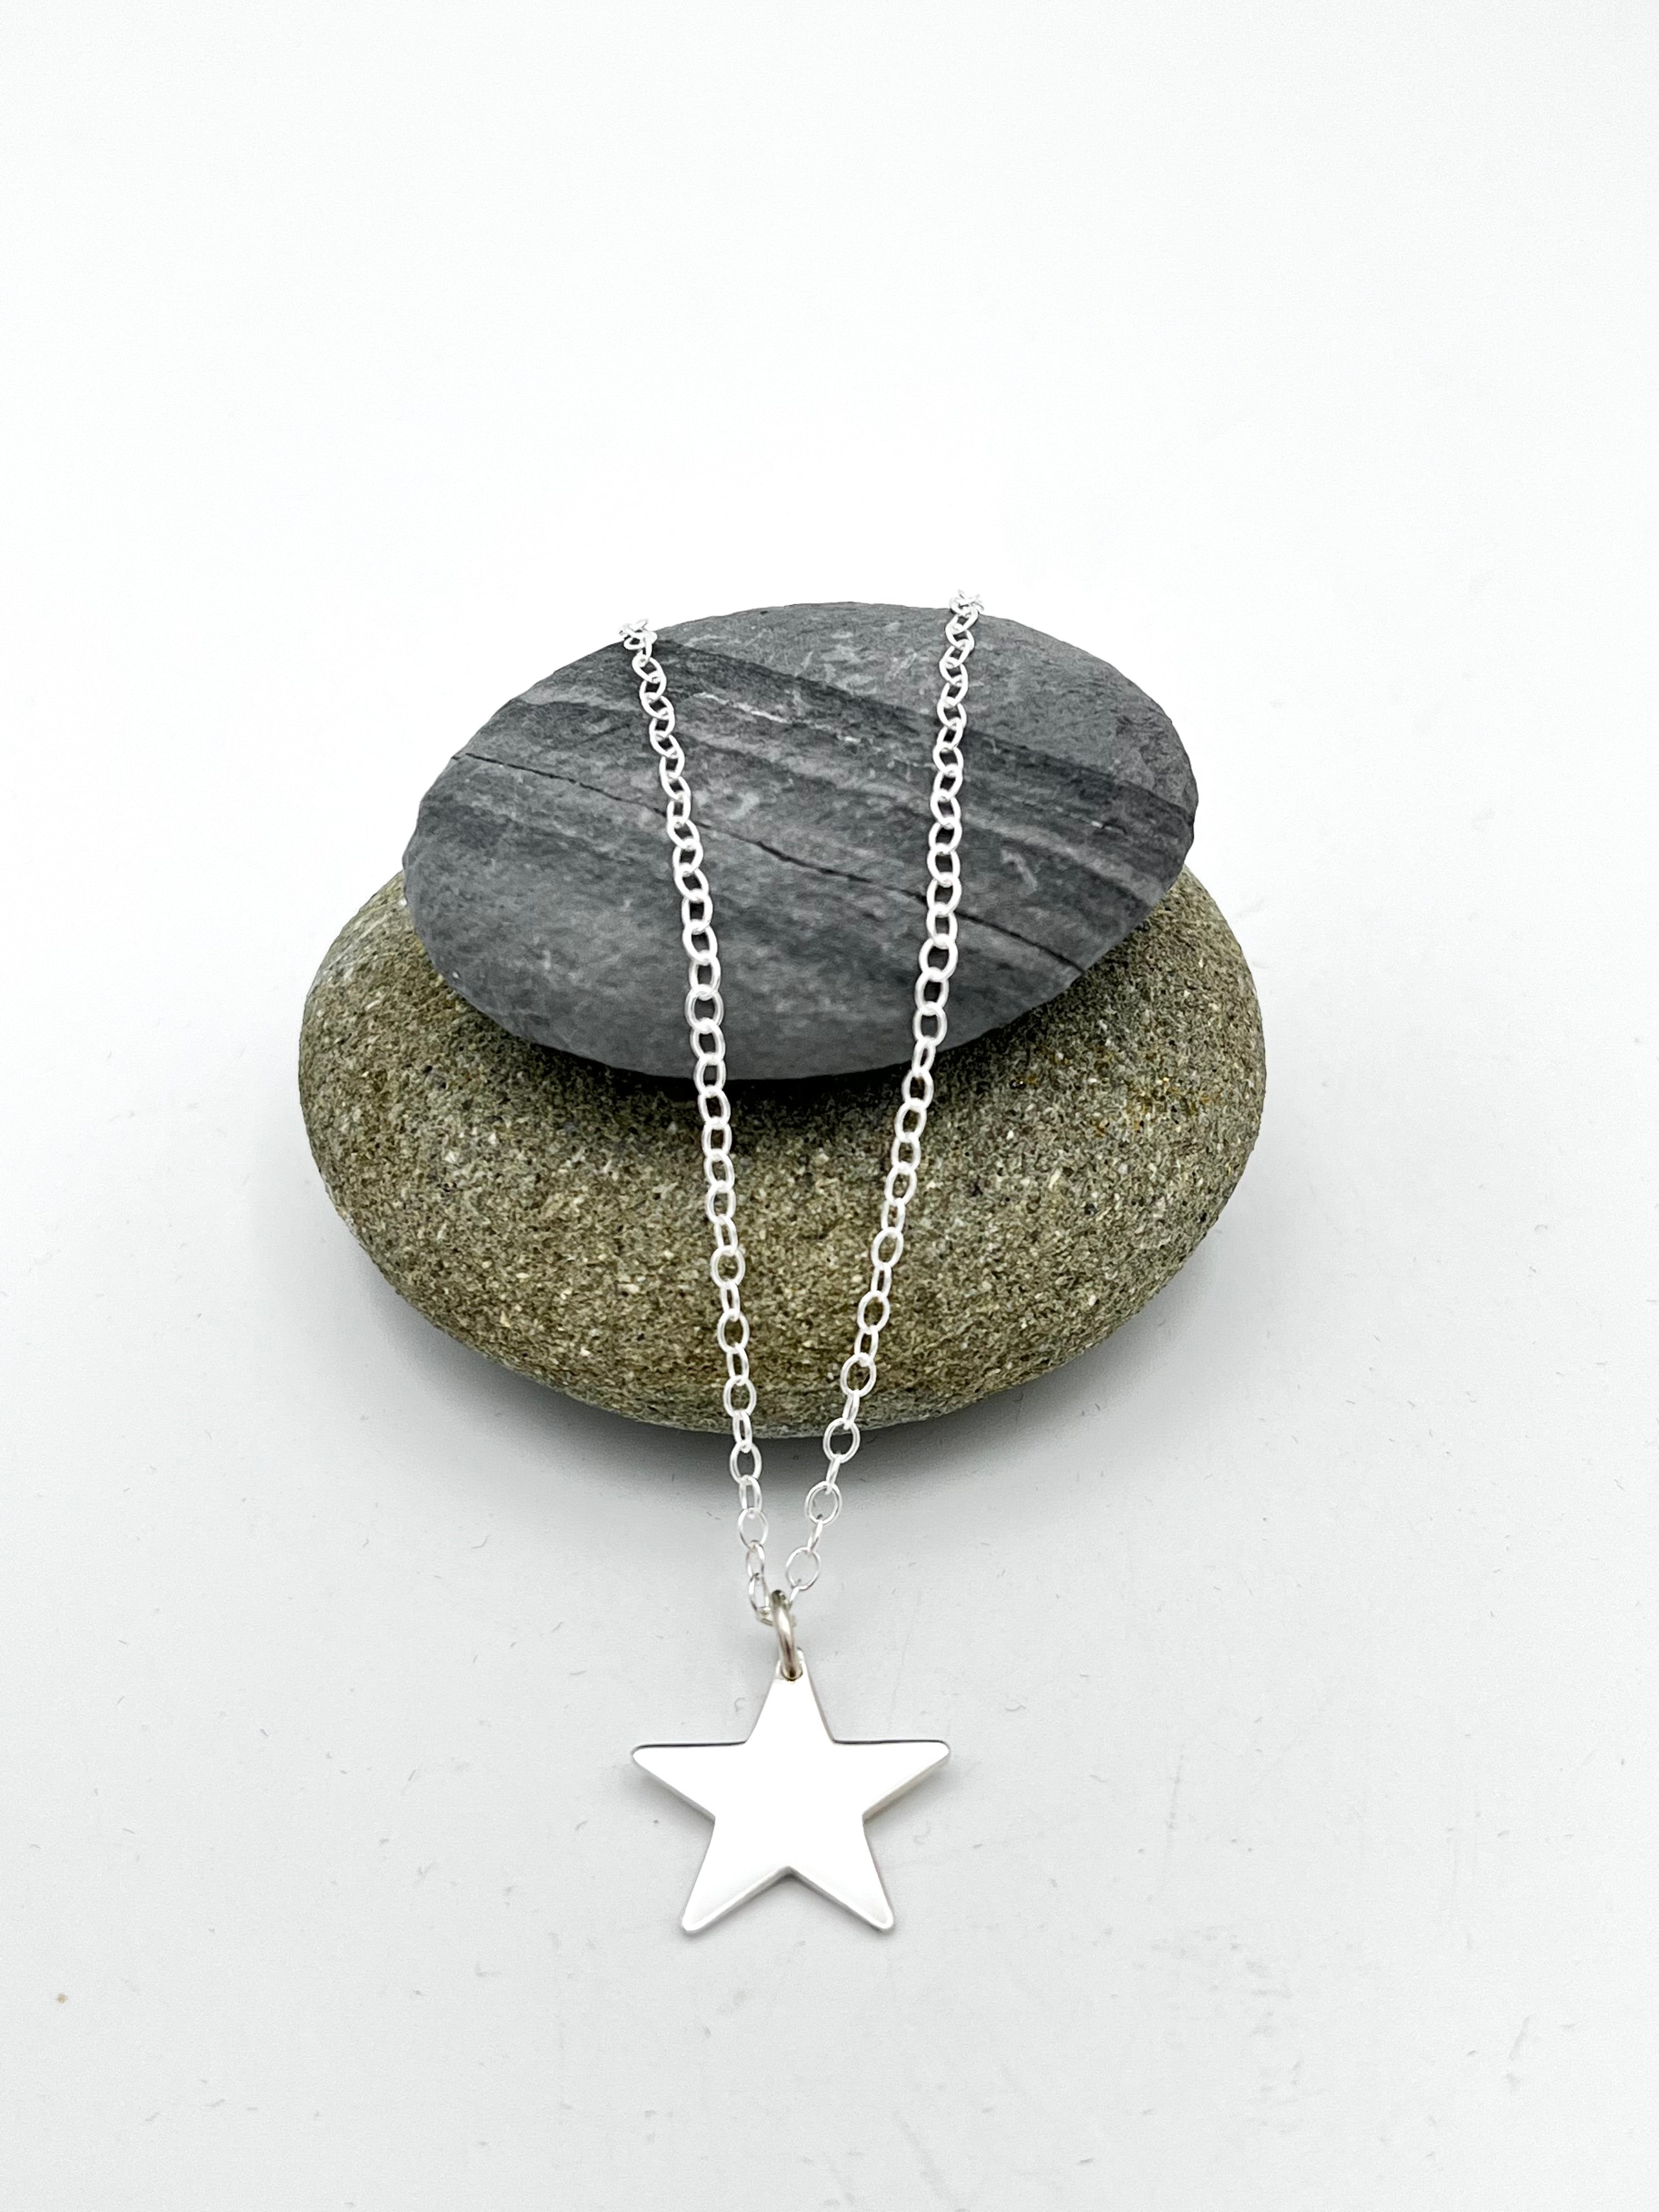 Single Star pendant 15mm wide polished finish on 16" chain